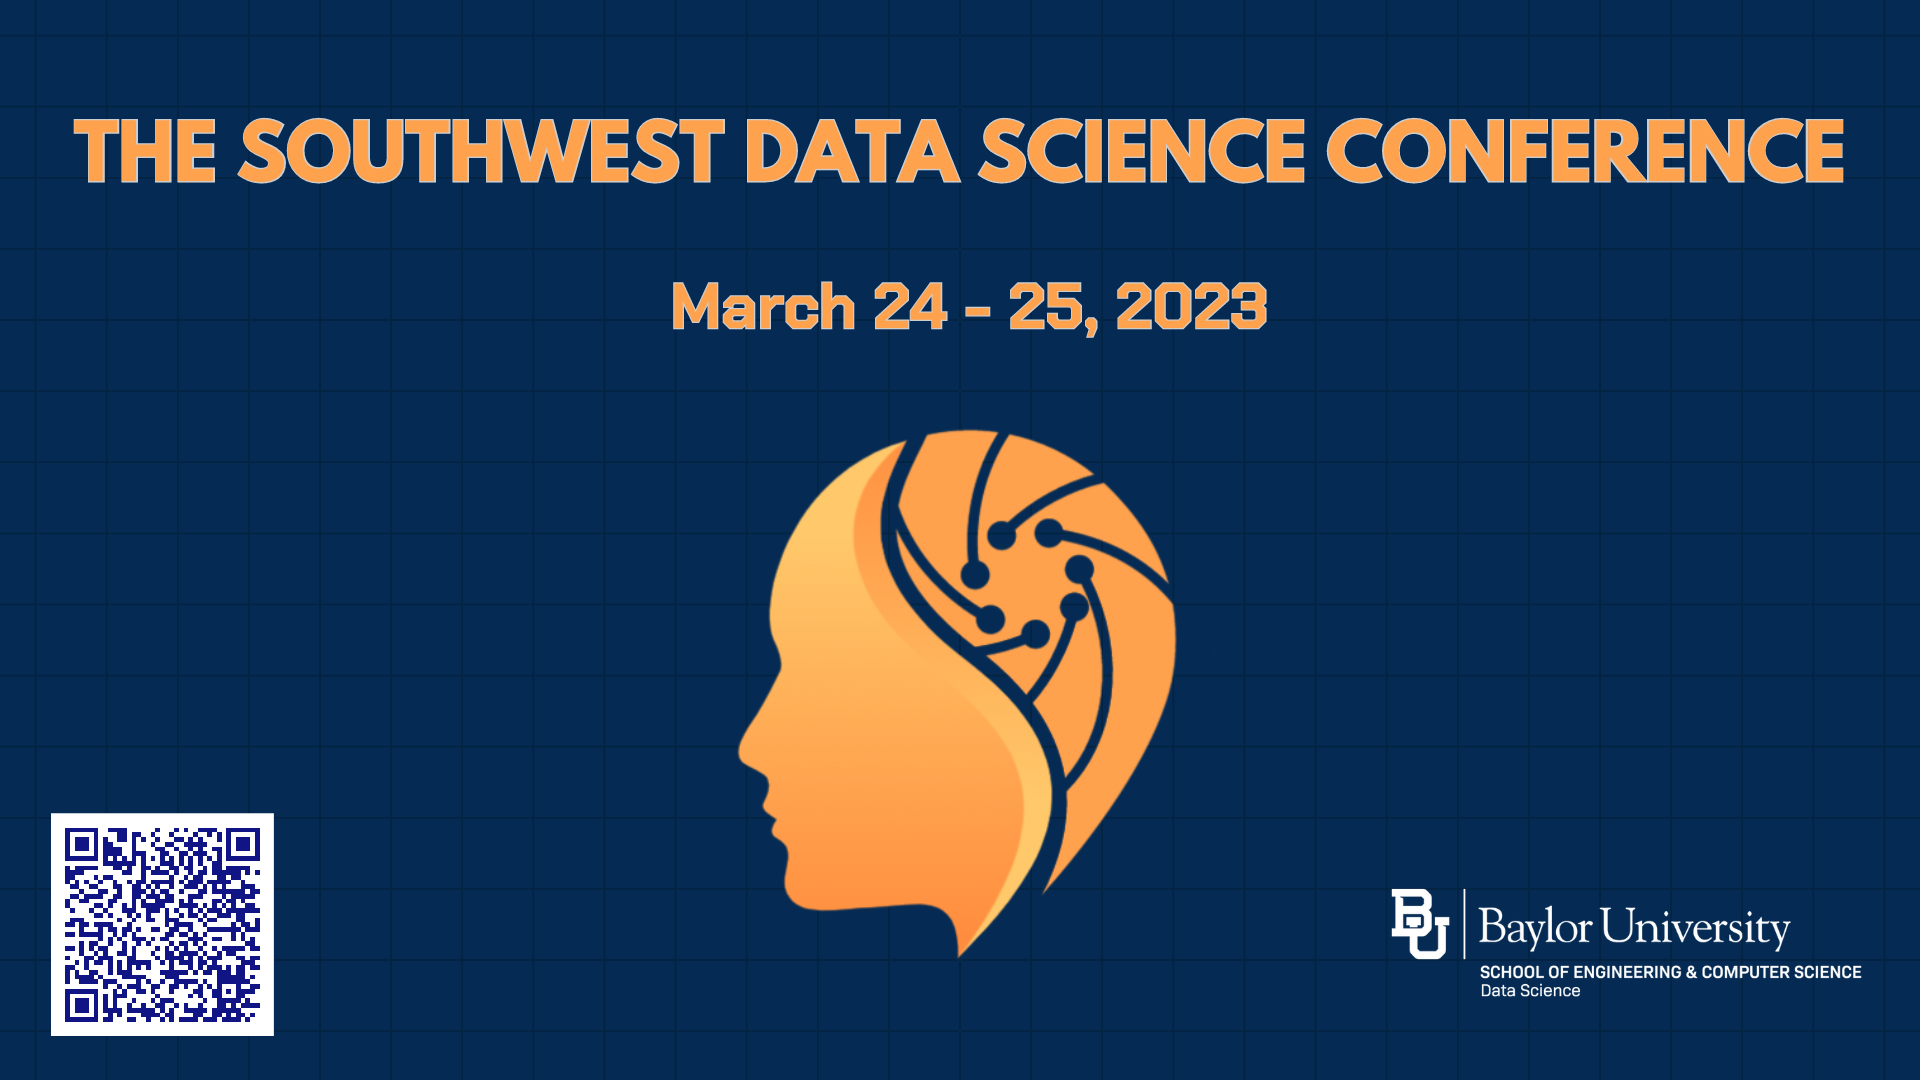 Southwest Data Science Conference March 24-25 at Baylor University